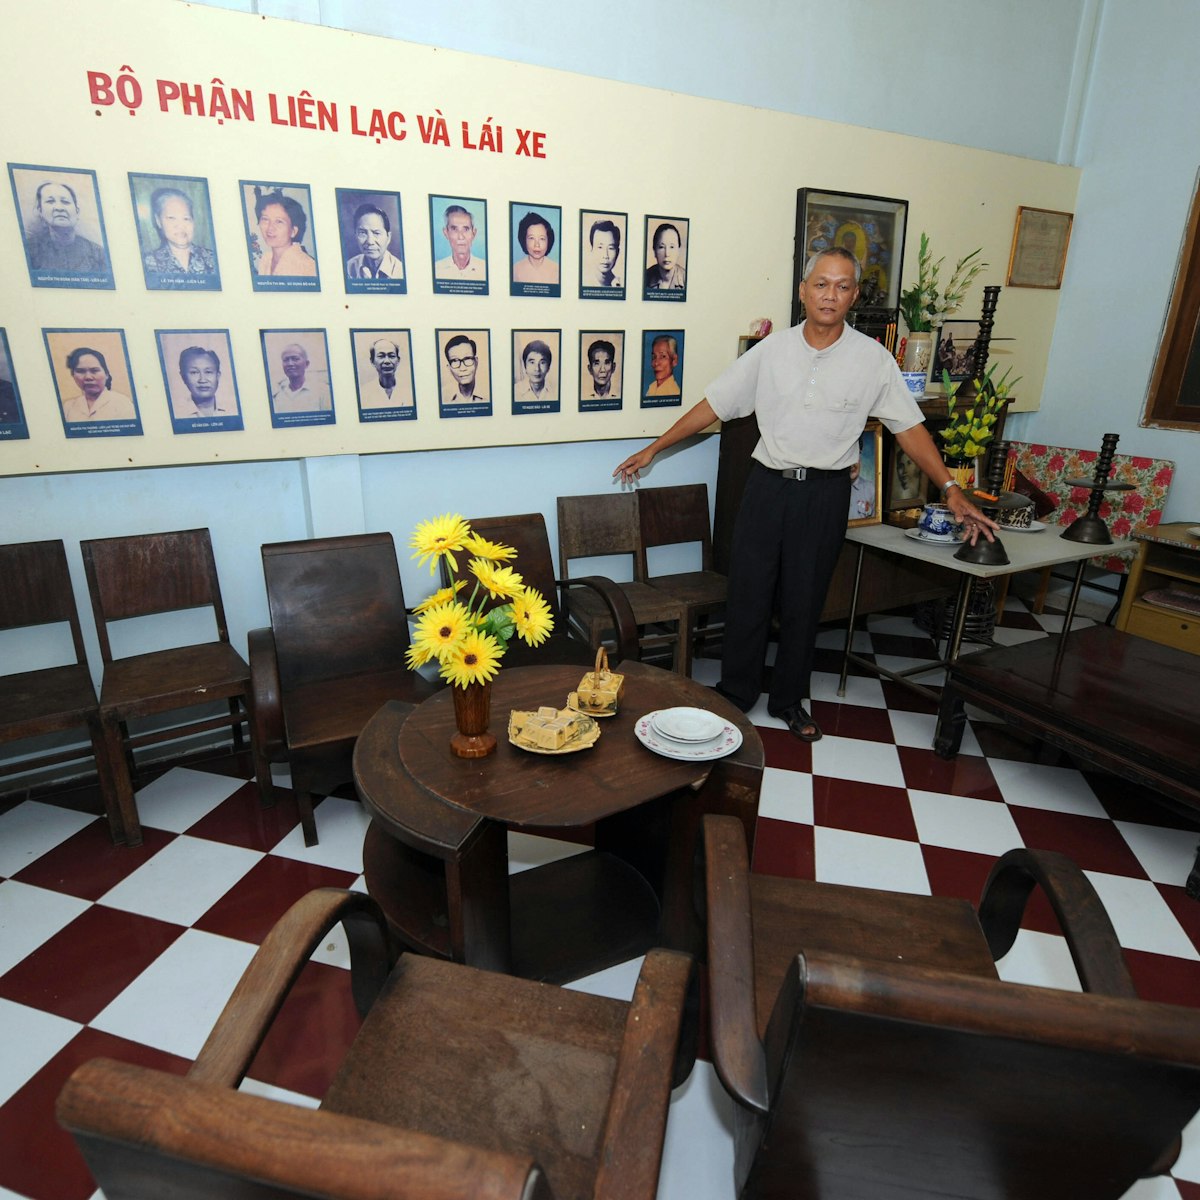 TO GO WITH: VIETNAM-MILITARY-TET-OFFENSIVE by Franck ZELLER.Ngo Van Lap, son of Pho Binh restaurant's owner Ngo Toai, a Viet Cong agent, shows in Ho Chi Minh-City, 28 January 2008, the meeting room in the restaurant where was ordered the start of the Vietnam War's Tet 1968 offensive.    AFP PHOTO/HOANG DINH Nam (Photo credit should read HOANG DINH NAM/AFP/Getty Images)